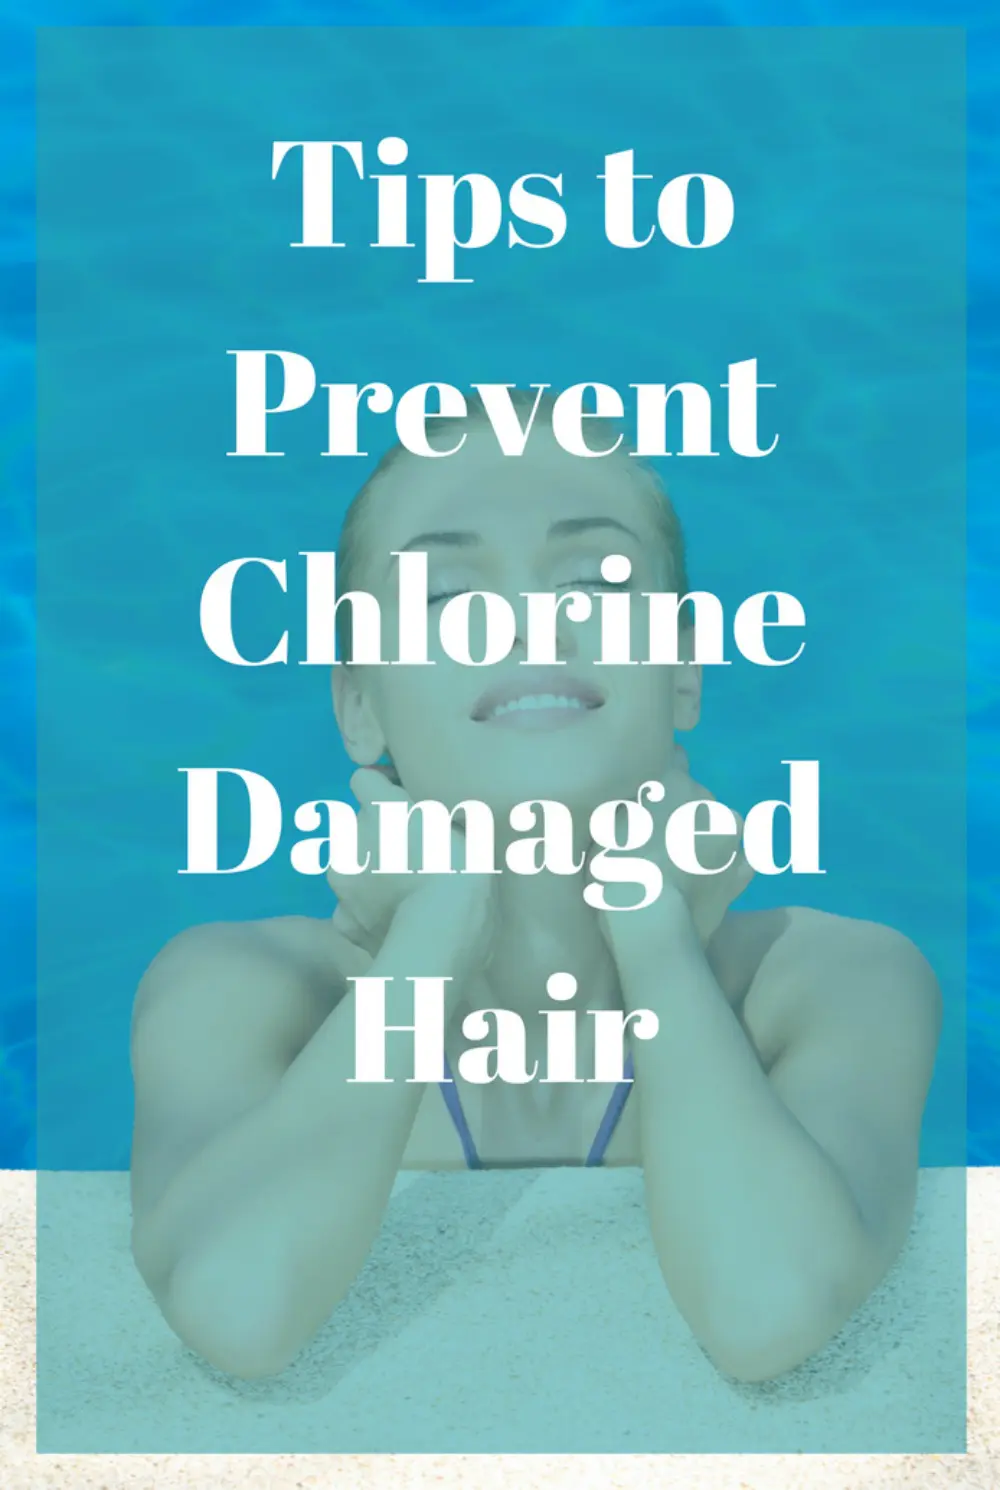 Tips to Prevent Chlorine Damaged Hair